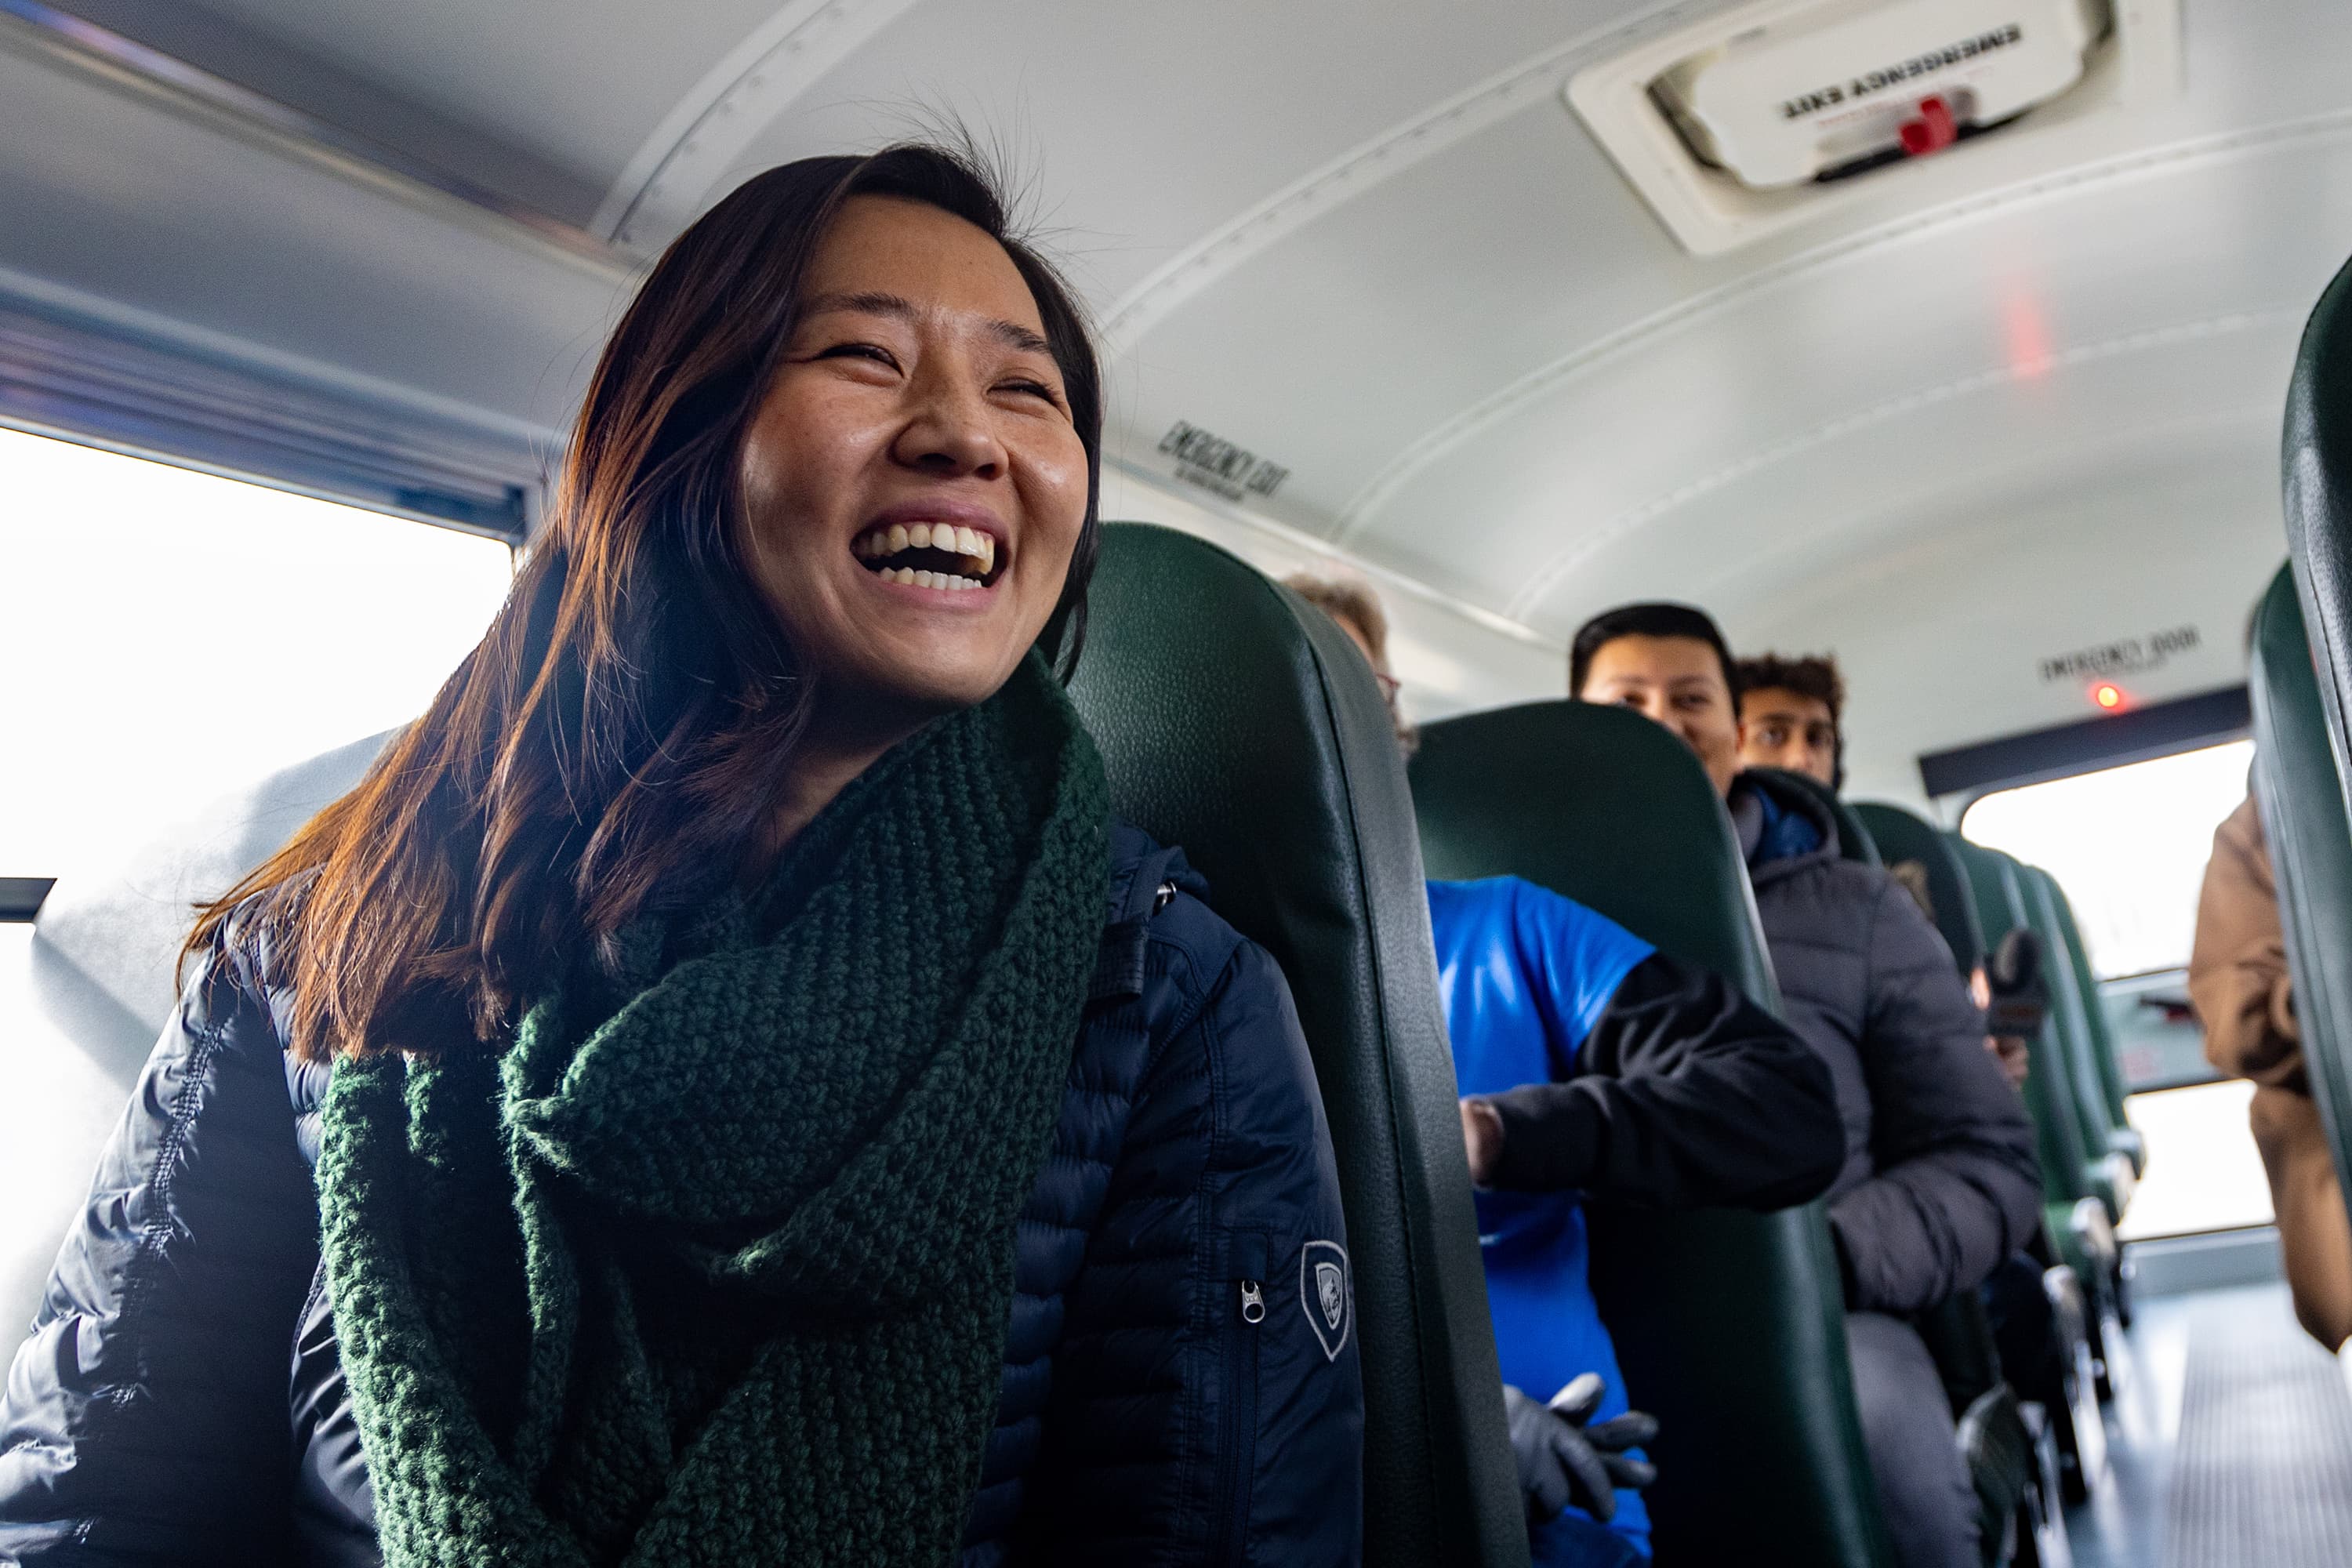 Mayor Michelle Wu smiles during her ride in the first electric school bus added to the Boston Public Schools’ fleet. (Jesse Costa/WBUR)